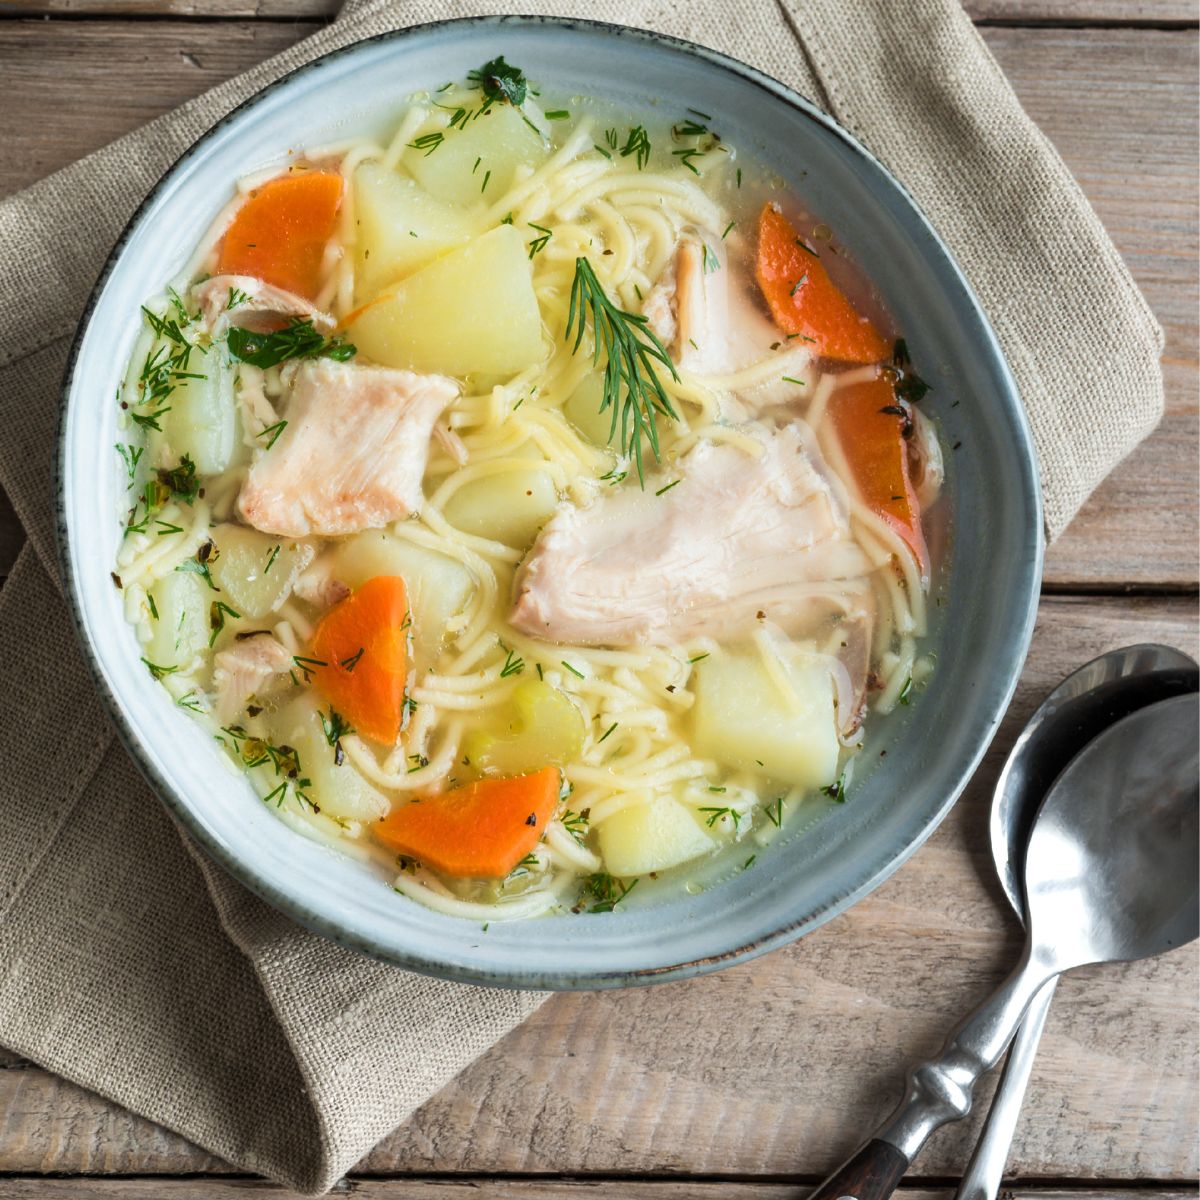 A bowl of delicious looking chicken noodle soup.